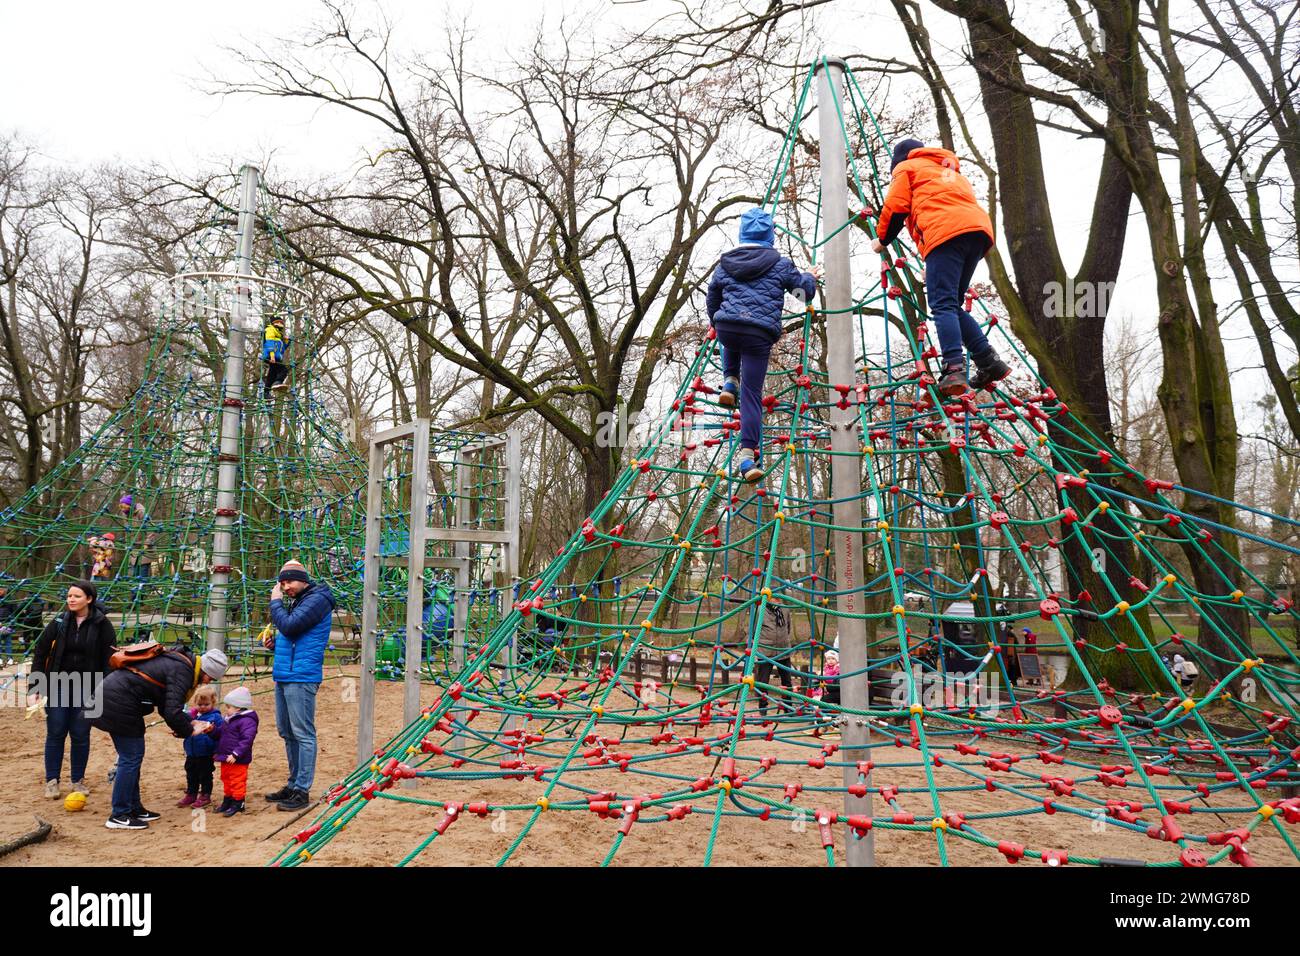 The parents and children in a playground in Solacki Park. Poznan, Poland Stock Photo